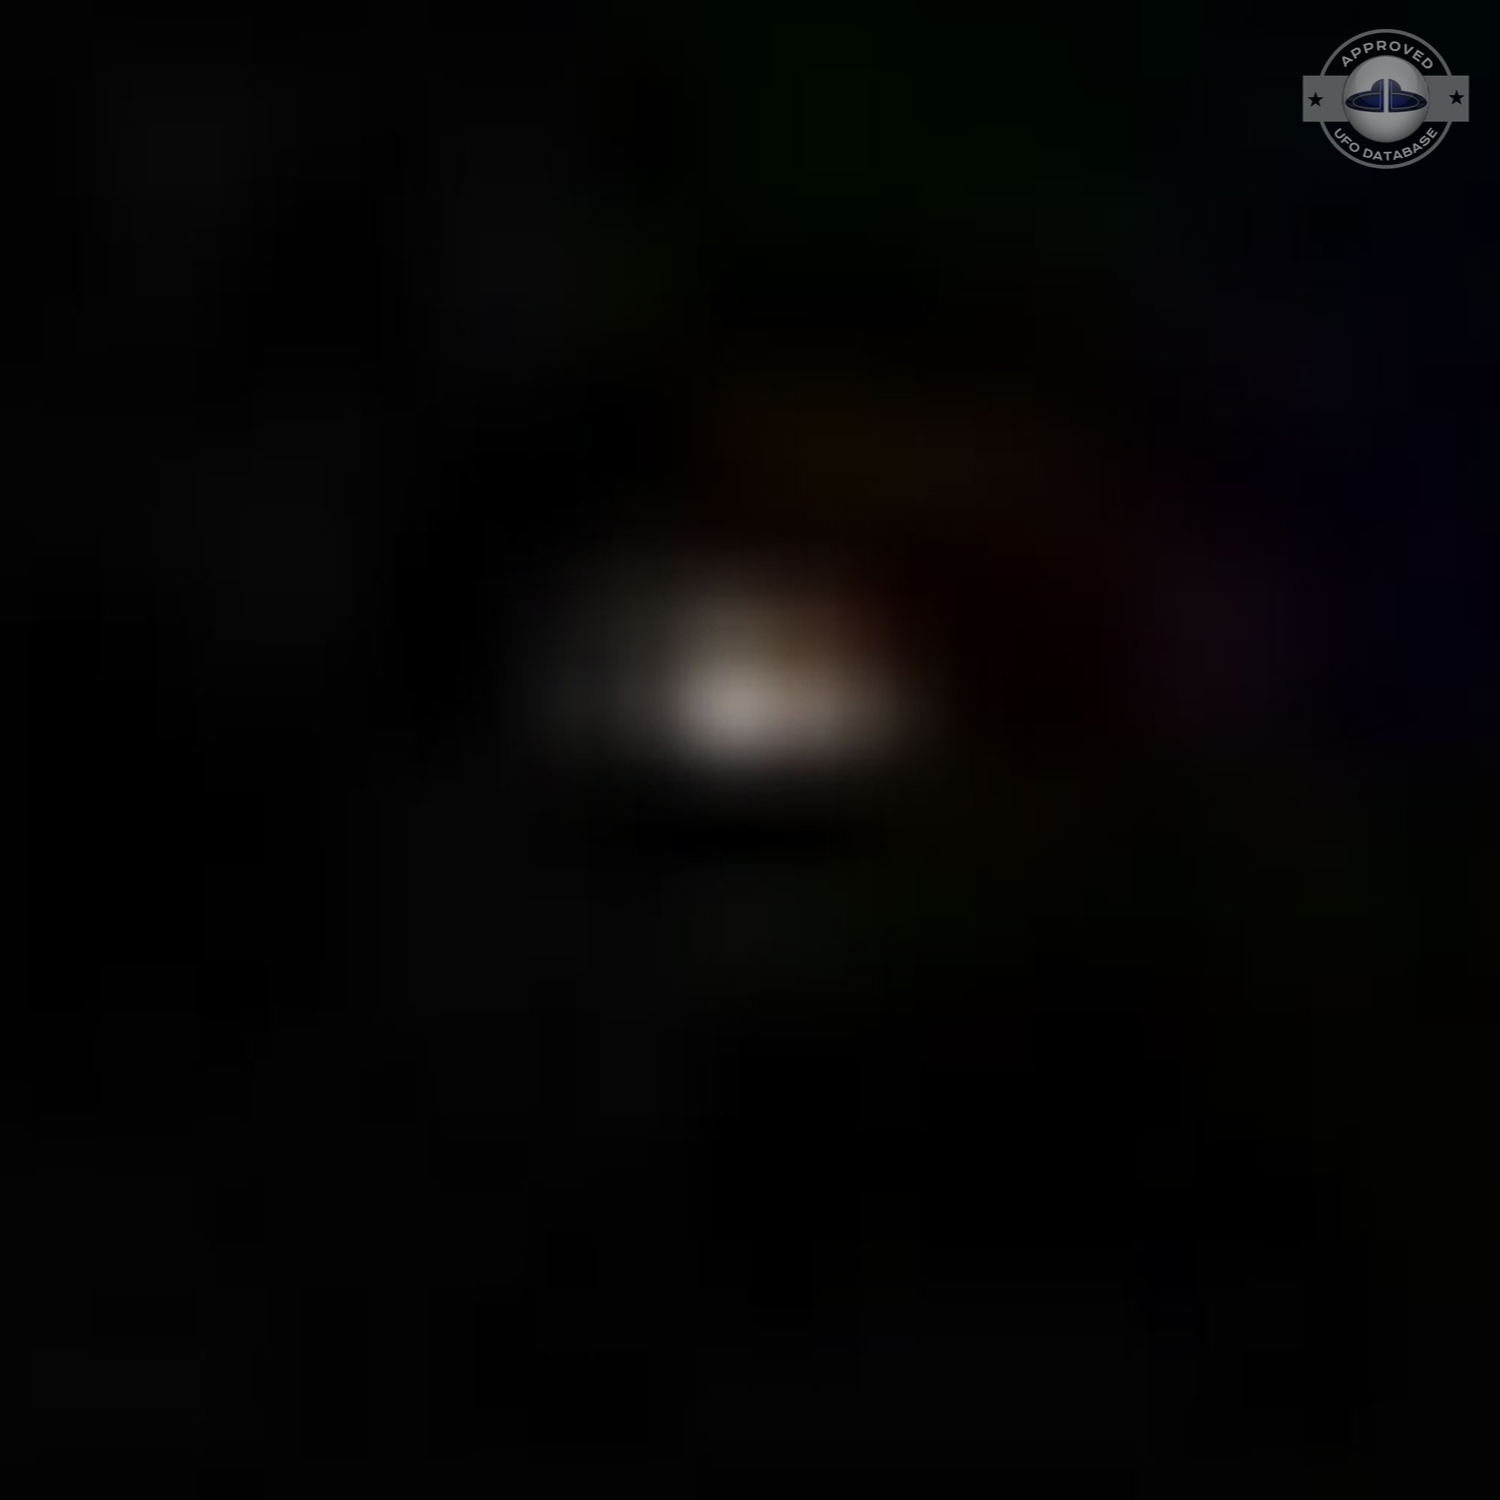 South African used to plane get UFO picture over Tamboo airport 2012 UFO Picture #419-2